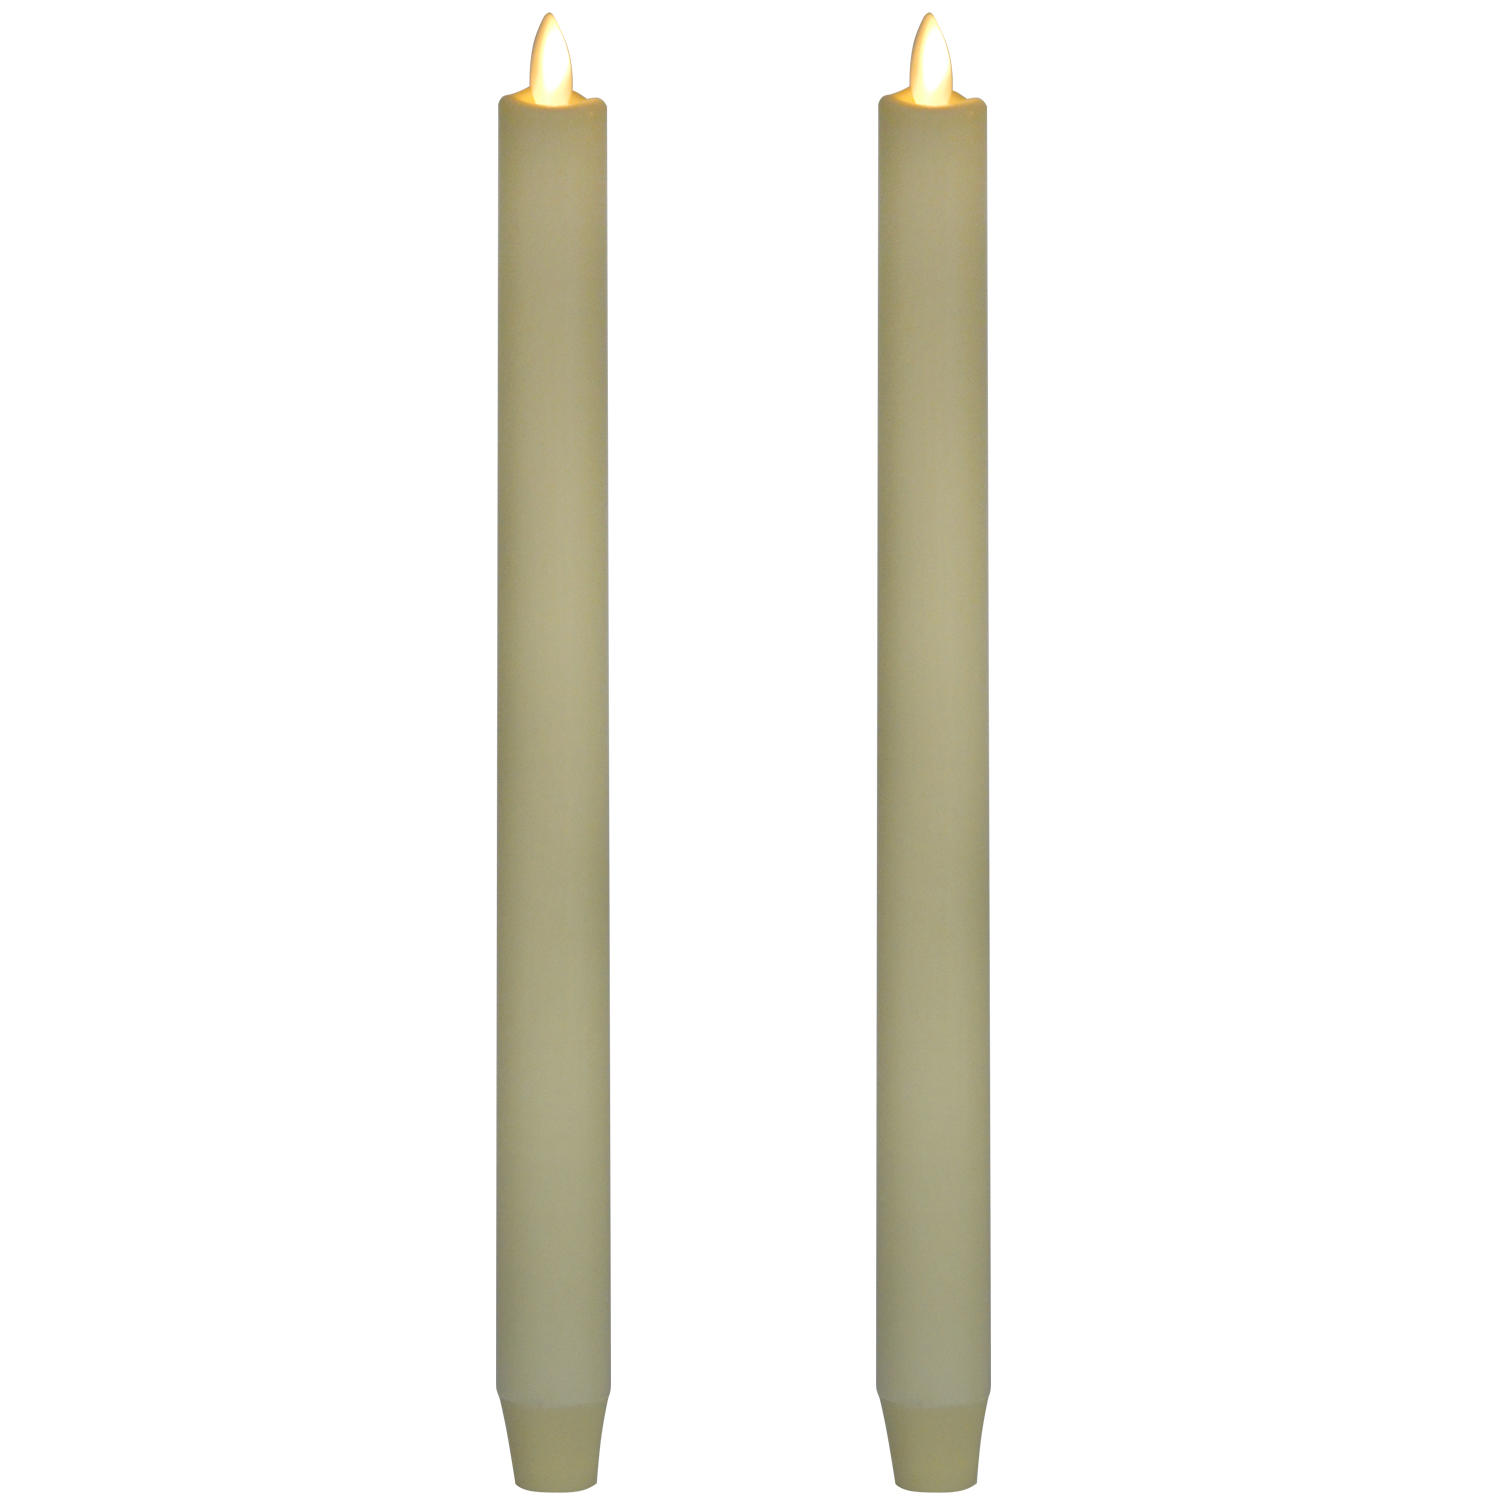 Dancing wick led flameless taper candles